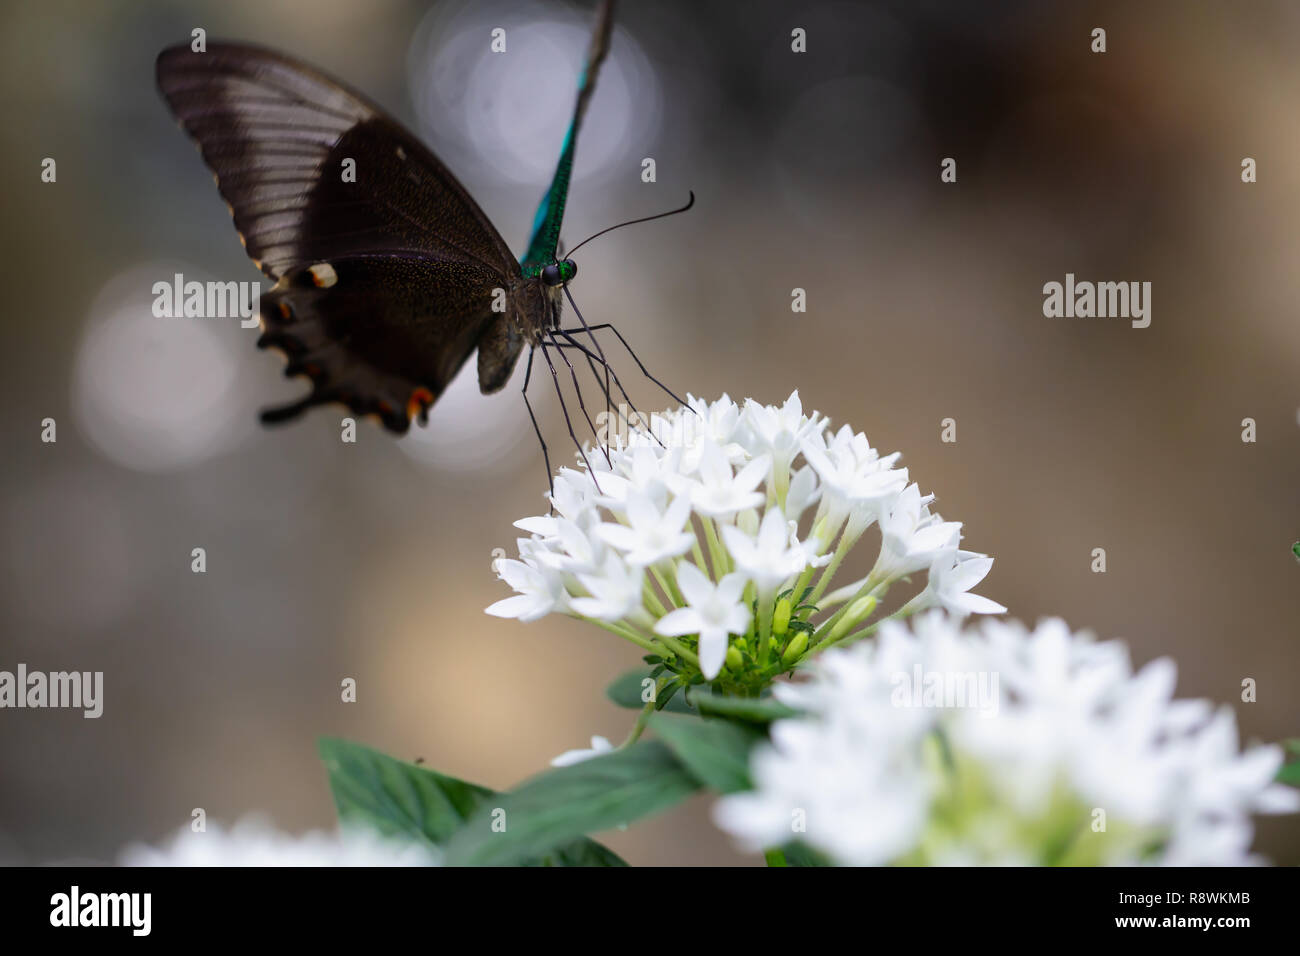 Beautiful macro picture of a butterfly,  Papilio palinurus, also known as Emerald Banded Peacock. Place of Origin is Indonesia, Southeast Asia. Stock Photo